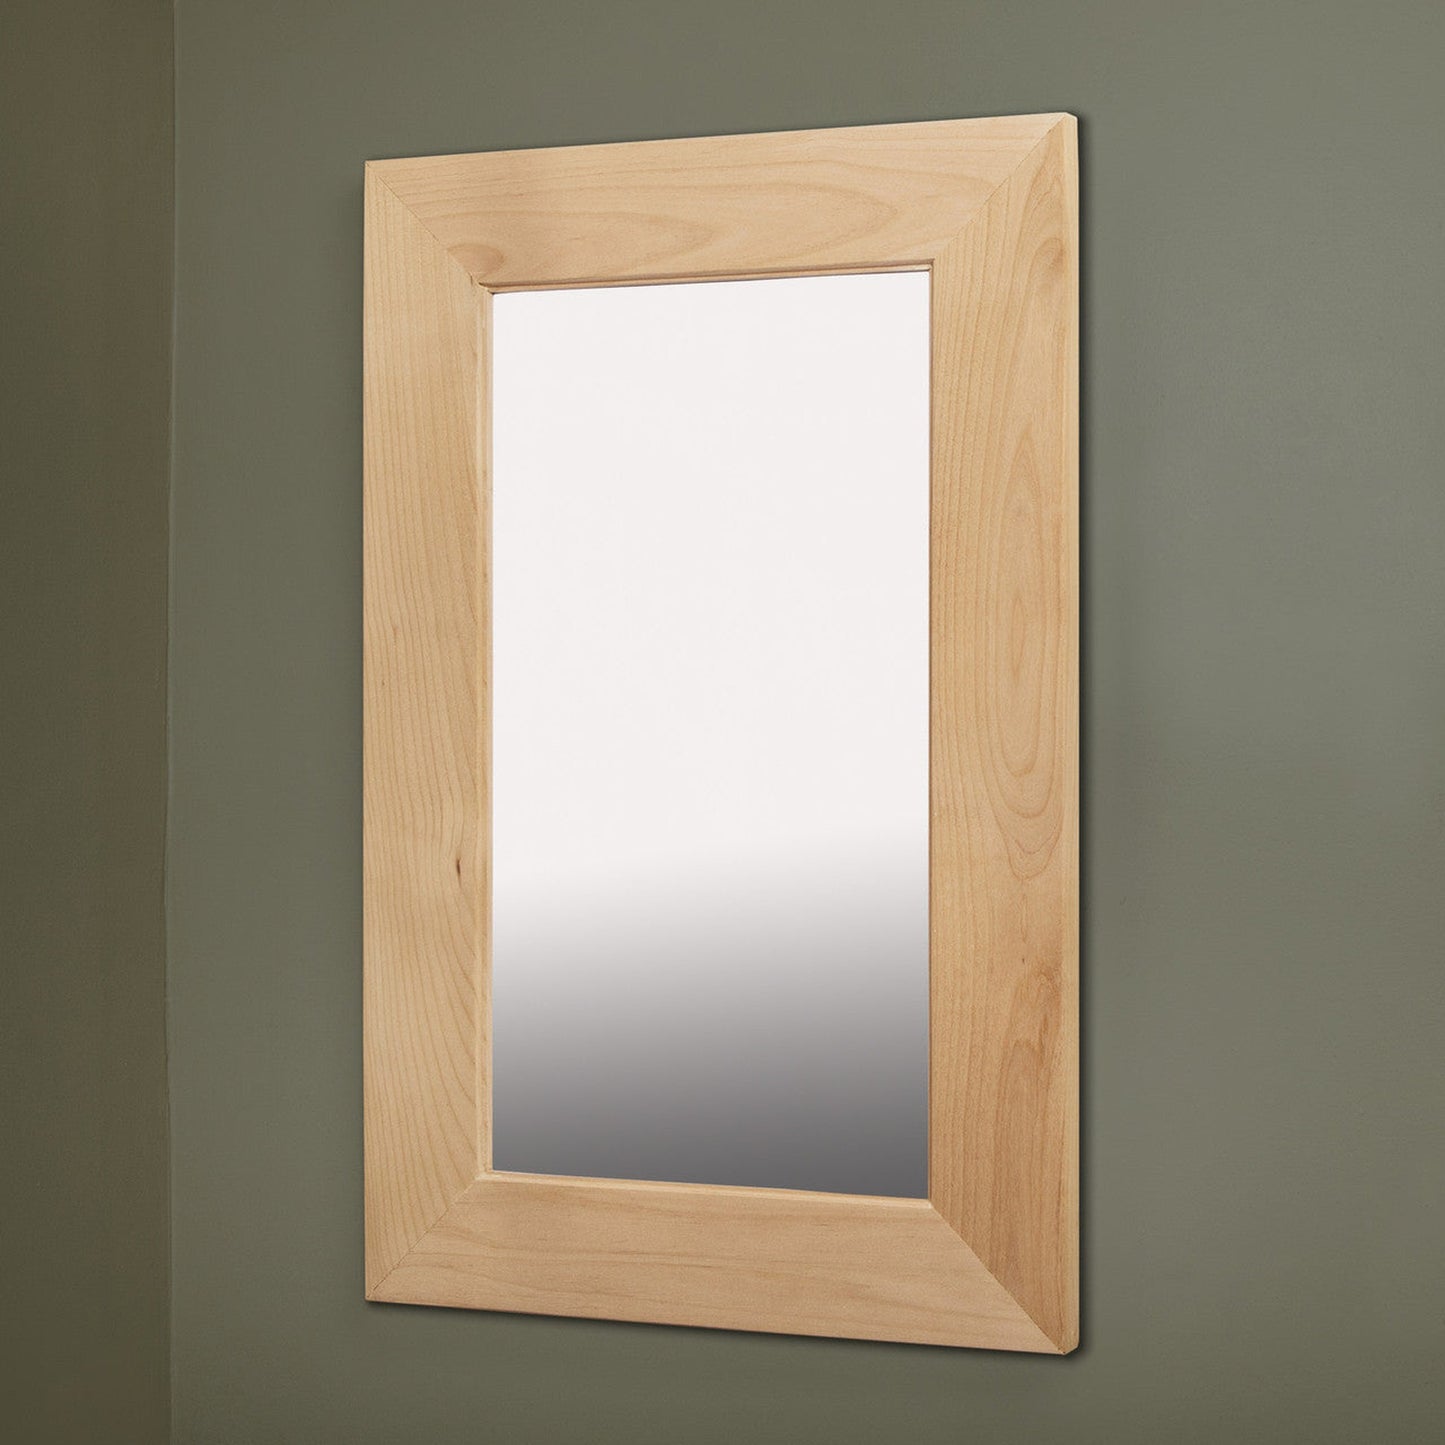 Fox Hollow Furnishings 14" x 24" Unfinished Flat Edge Special 3" Depth Natural Interior Mirrored Medicine Cabinet